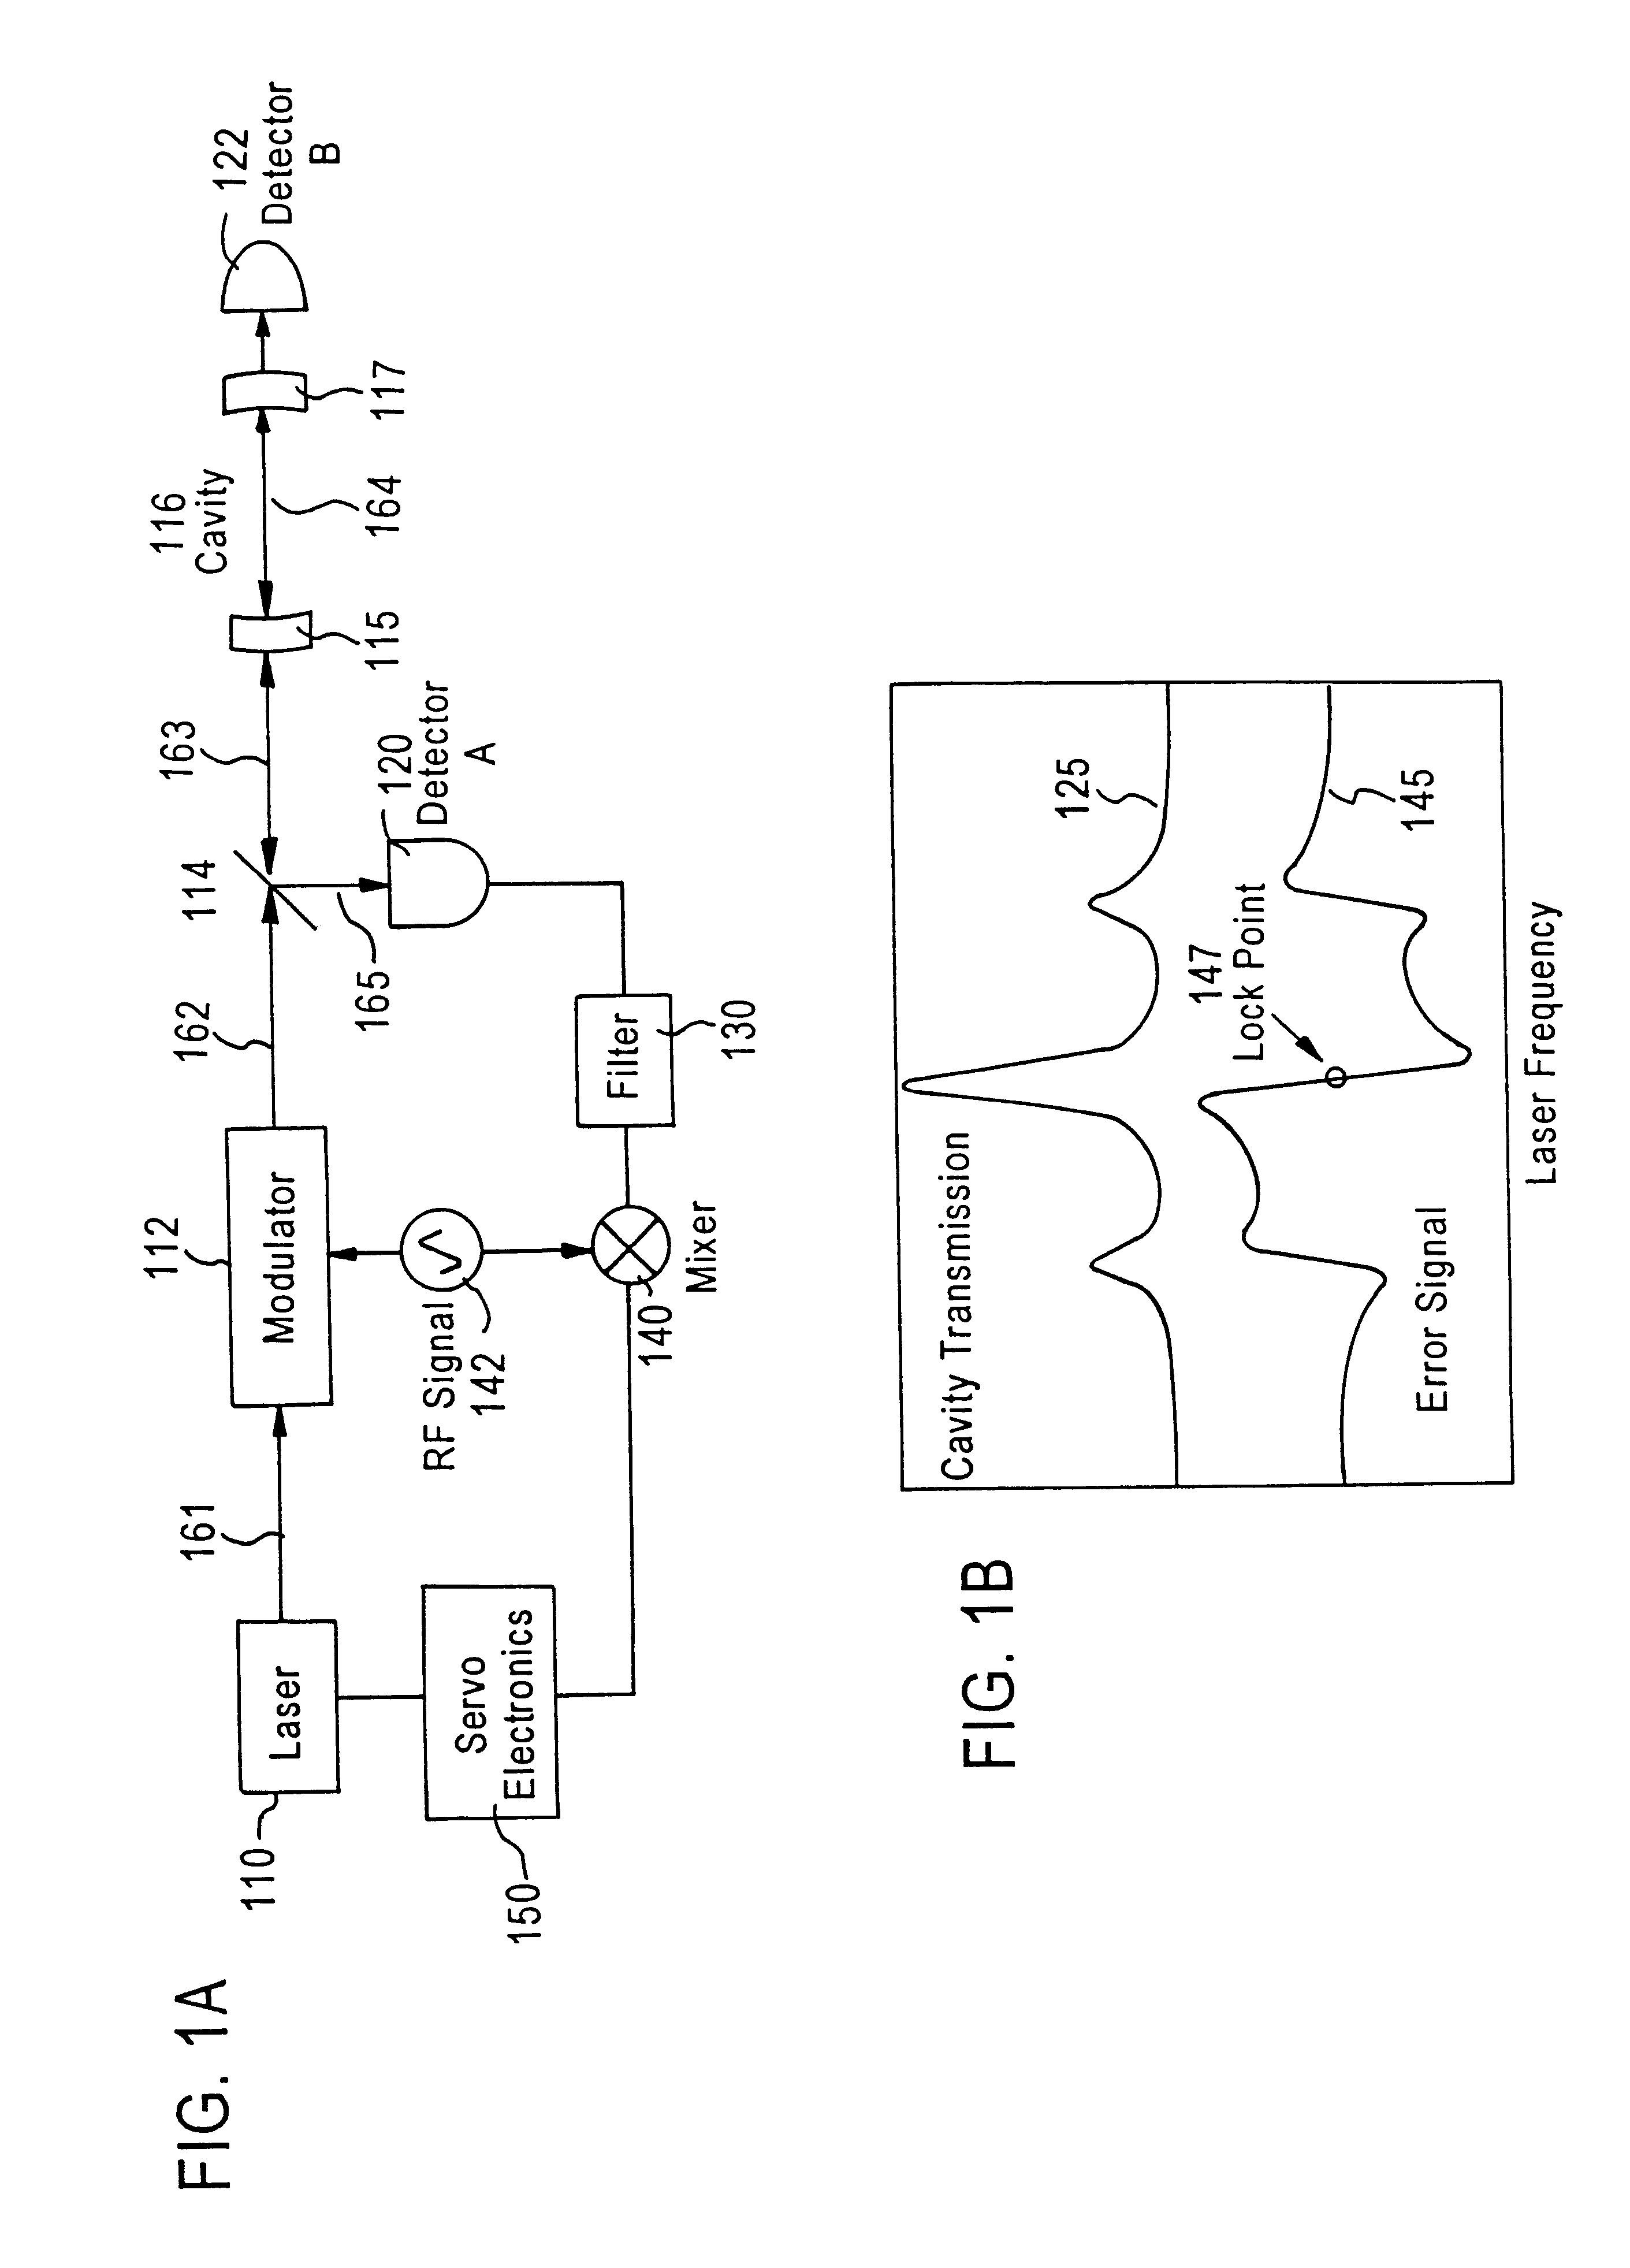 Laser frequency stabilizer using transient spectral hole burning